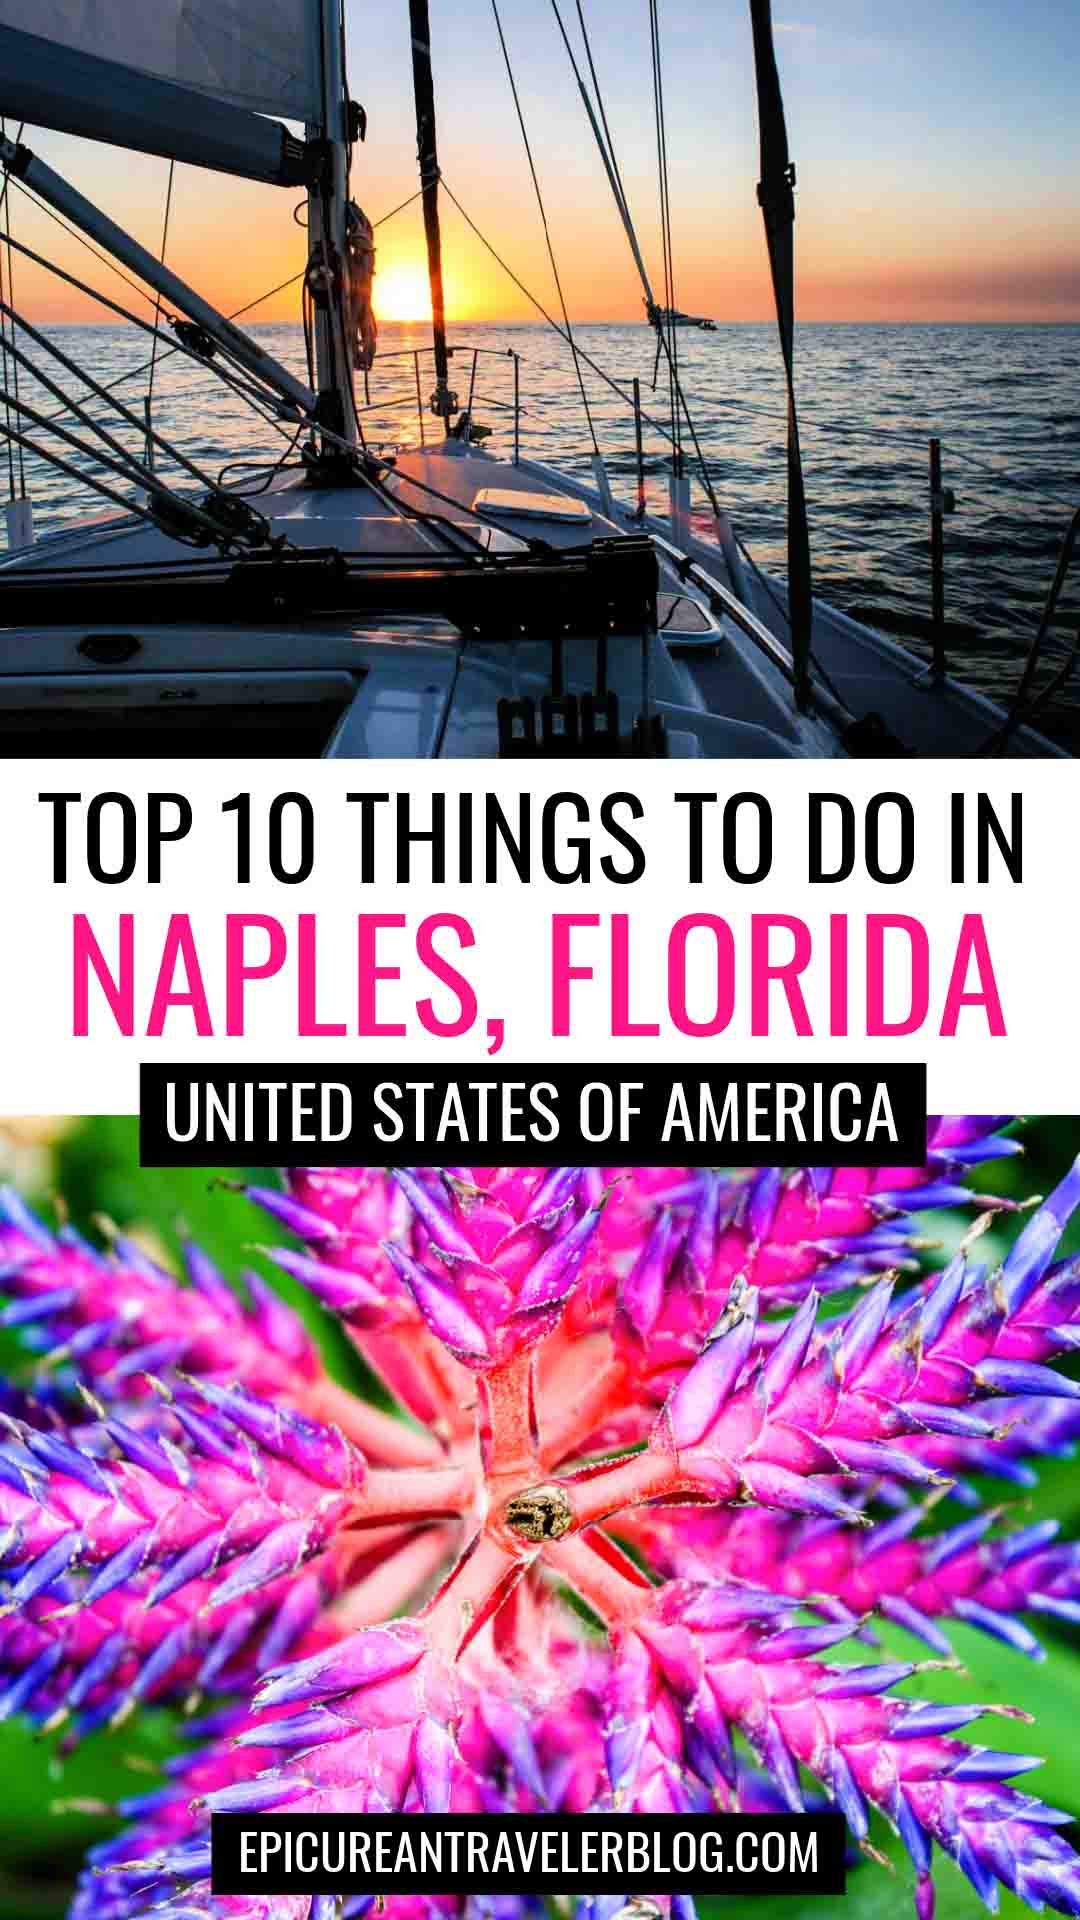 Top 10 things to do in Naples, Florida, USA